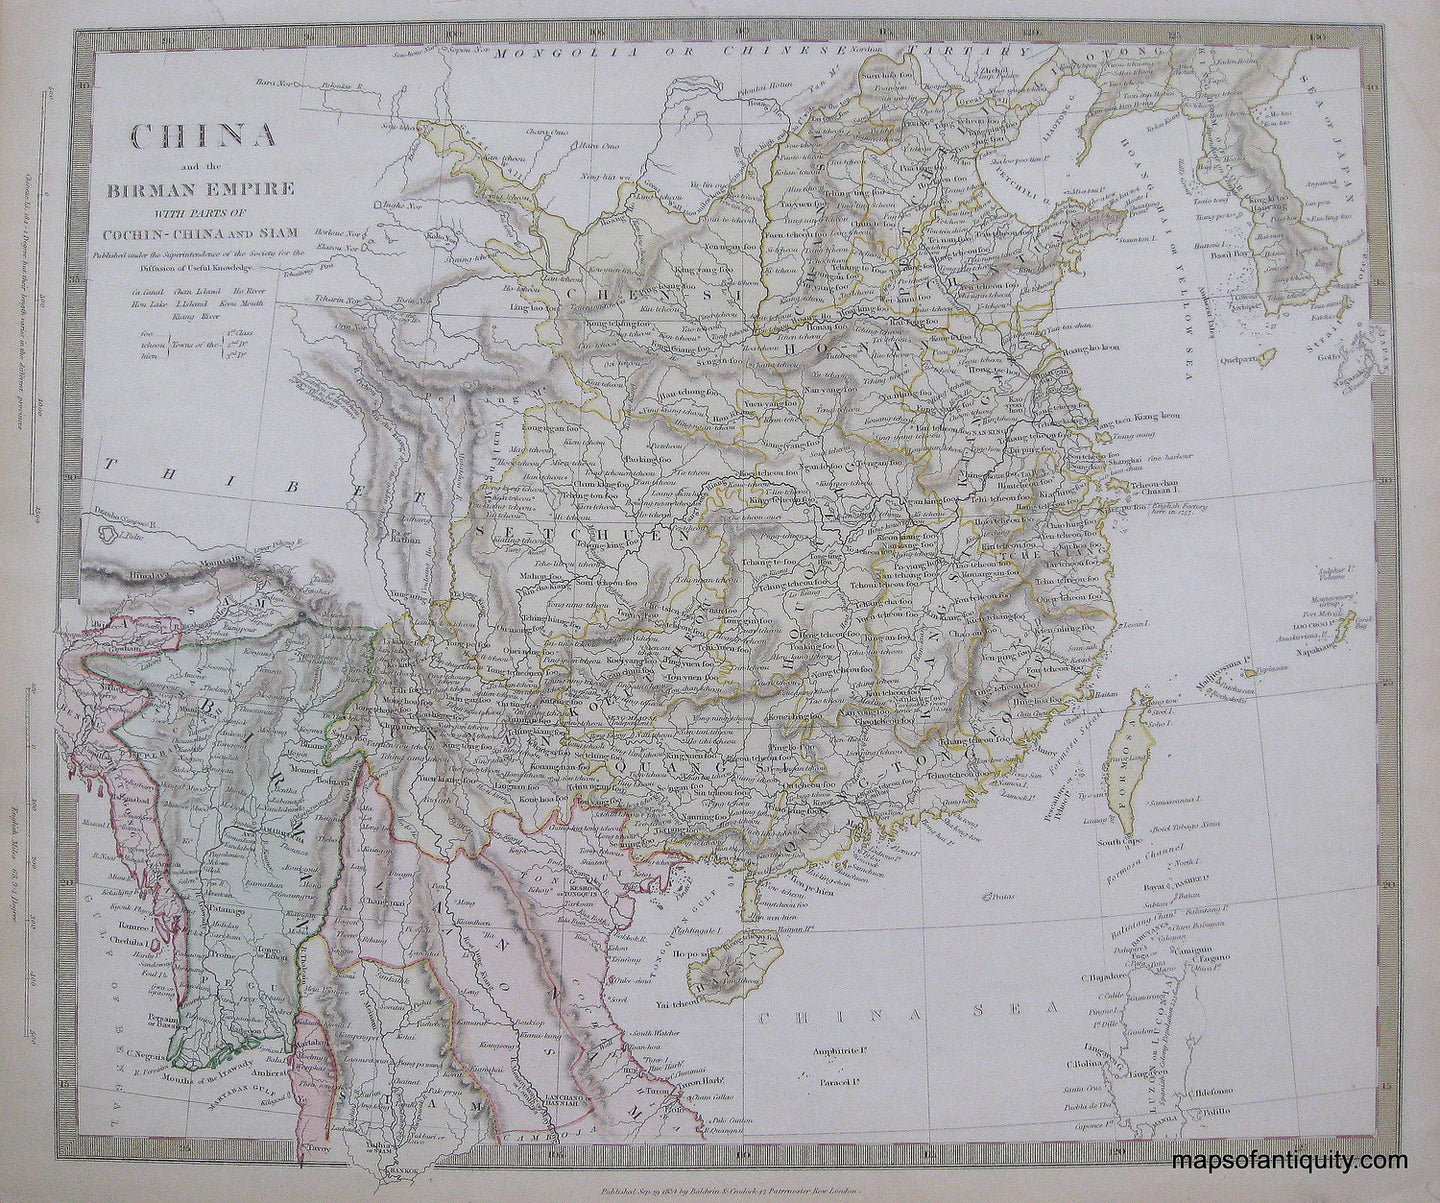 Antique-Hand-Colored-Map-China-and-the-Birman-Empire-with-parts-of-Cochin-China-and-Siam-Asia-China-1834-SDUK/-Society-for-the-Diffusion-of-Useful-Knowledge-Maps-Of-Antiquity